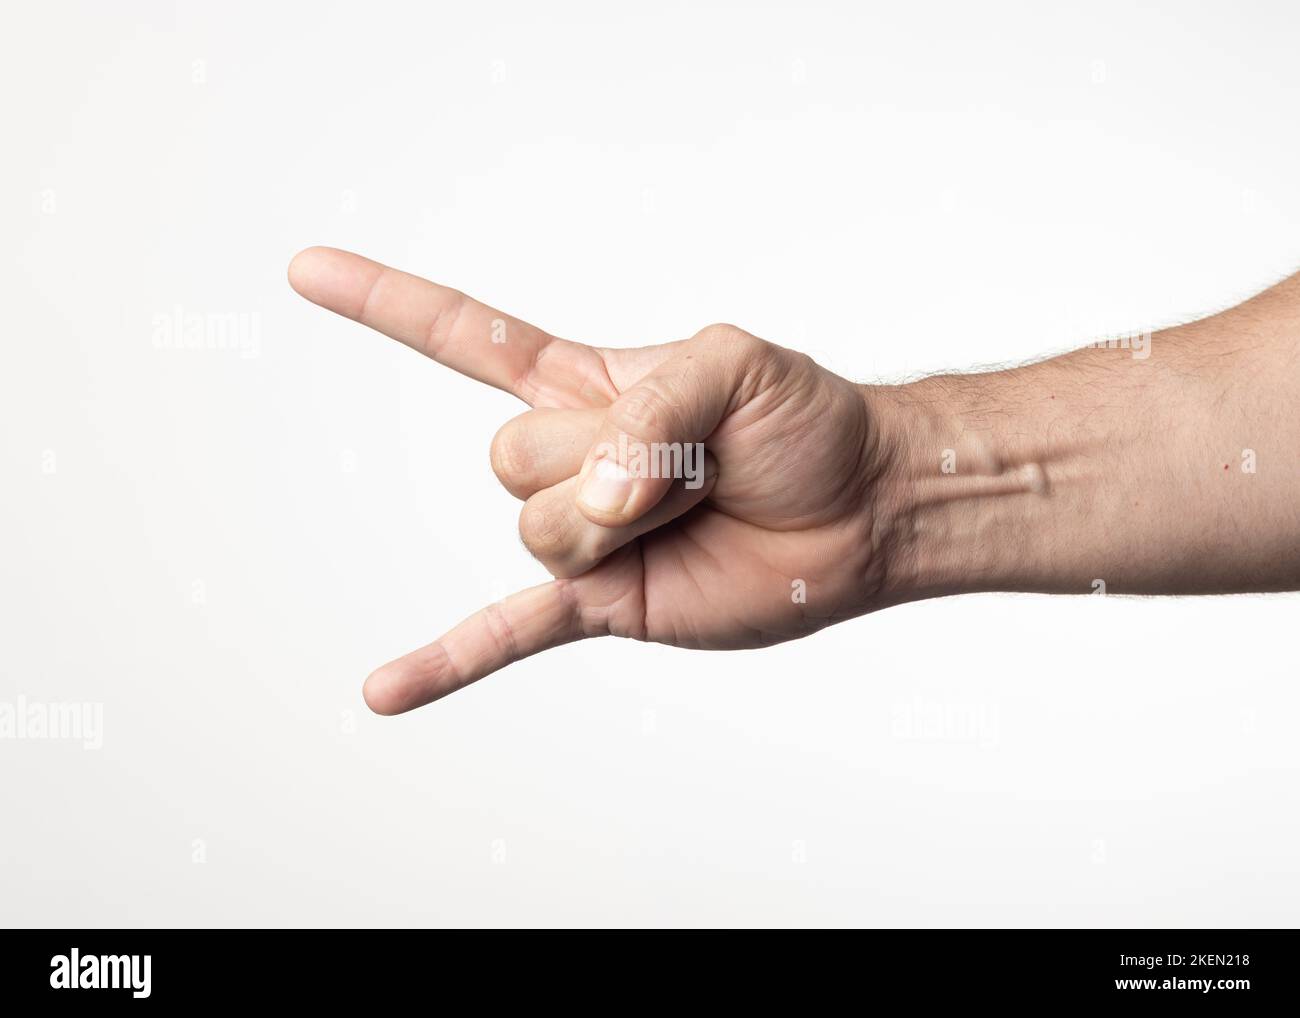 A man's hand and arm on a nuclear white background, showing a gesture of greeting approval or positivity. Stock Photo